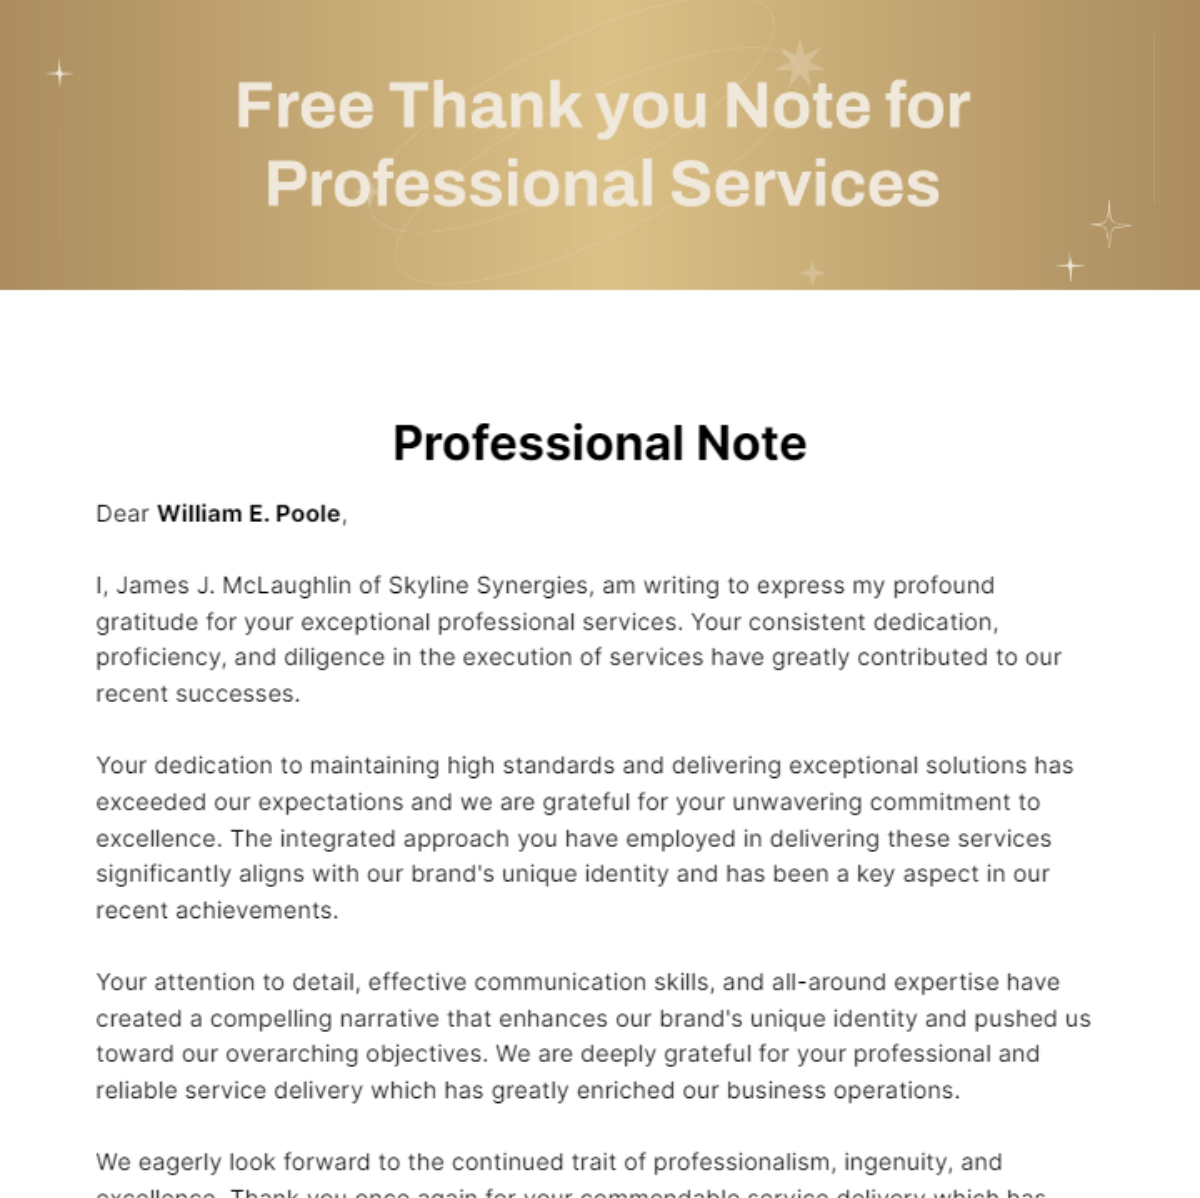 Thank you Note for Professional Services Template